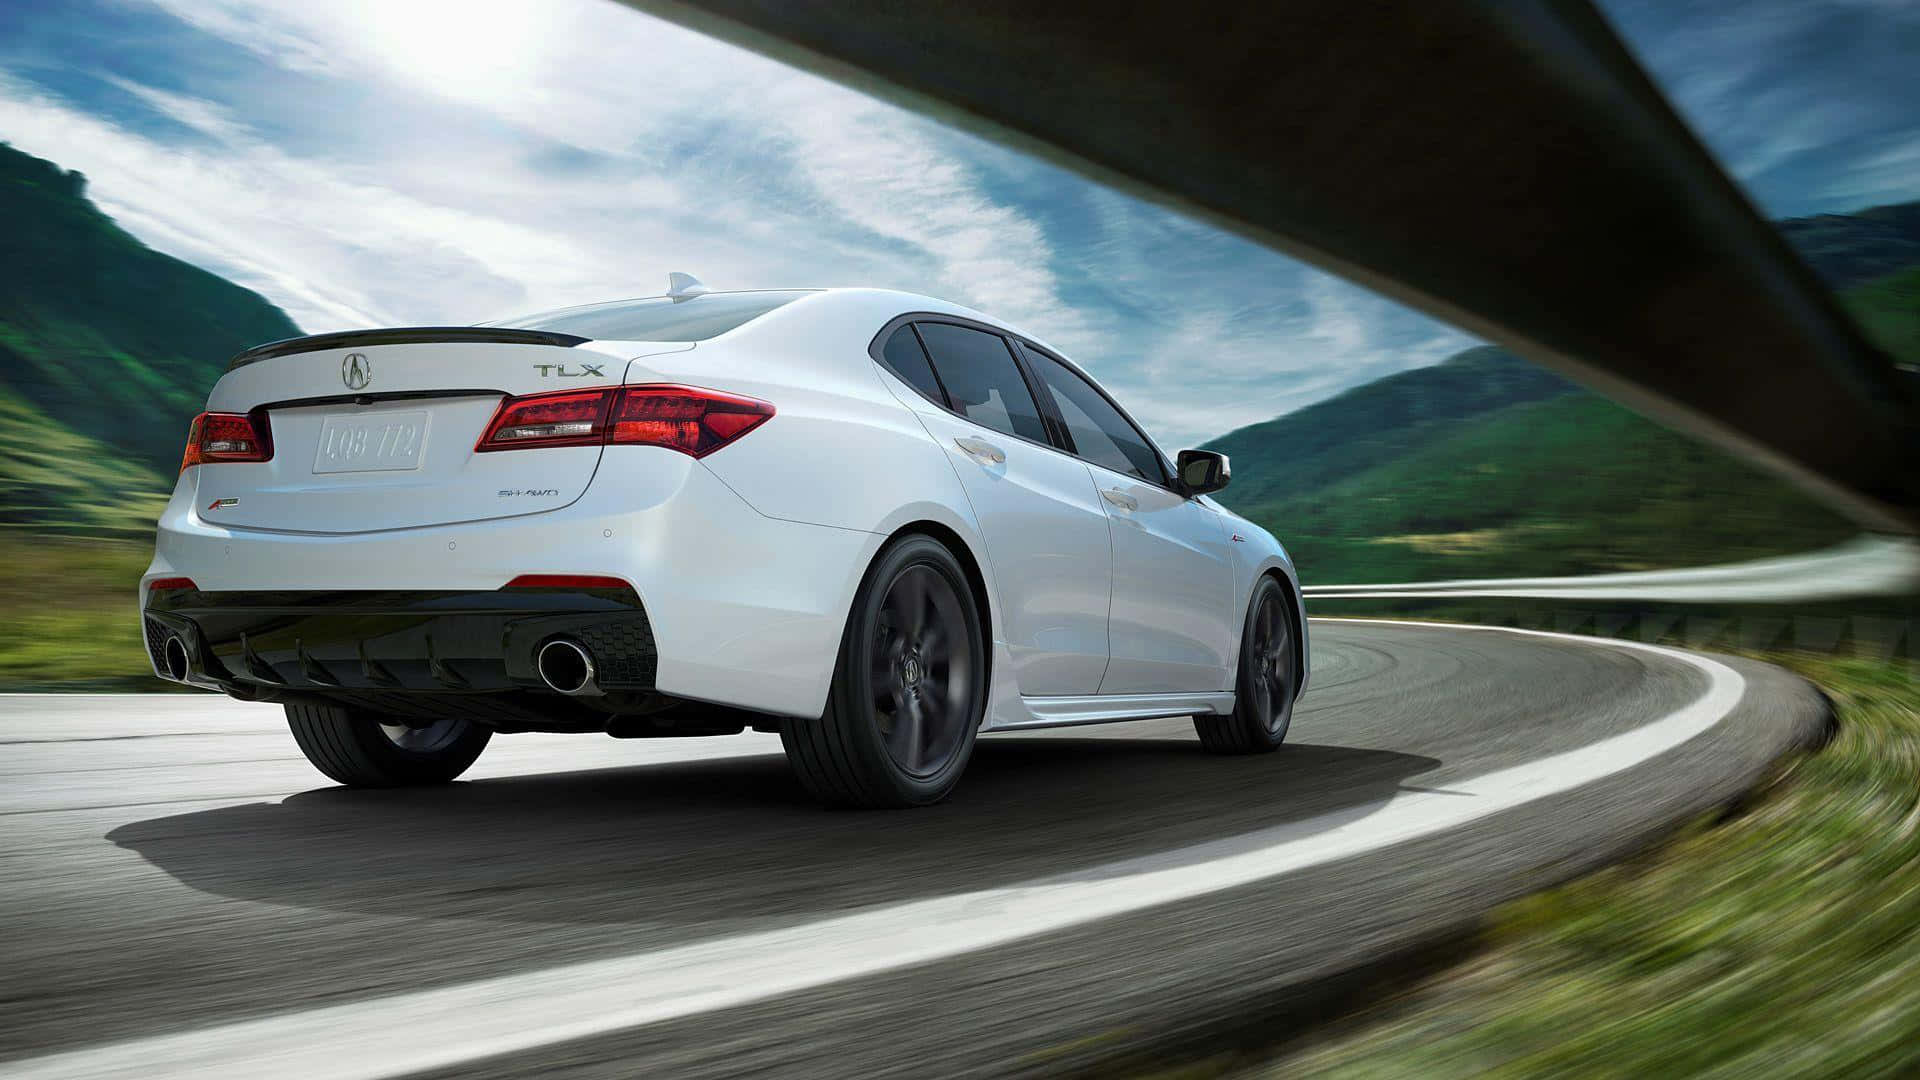 Sleek and Stylish Acura TLX on the Road Wallpaper